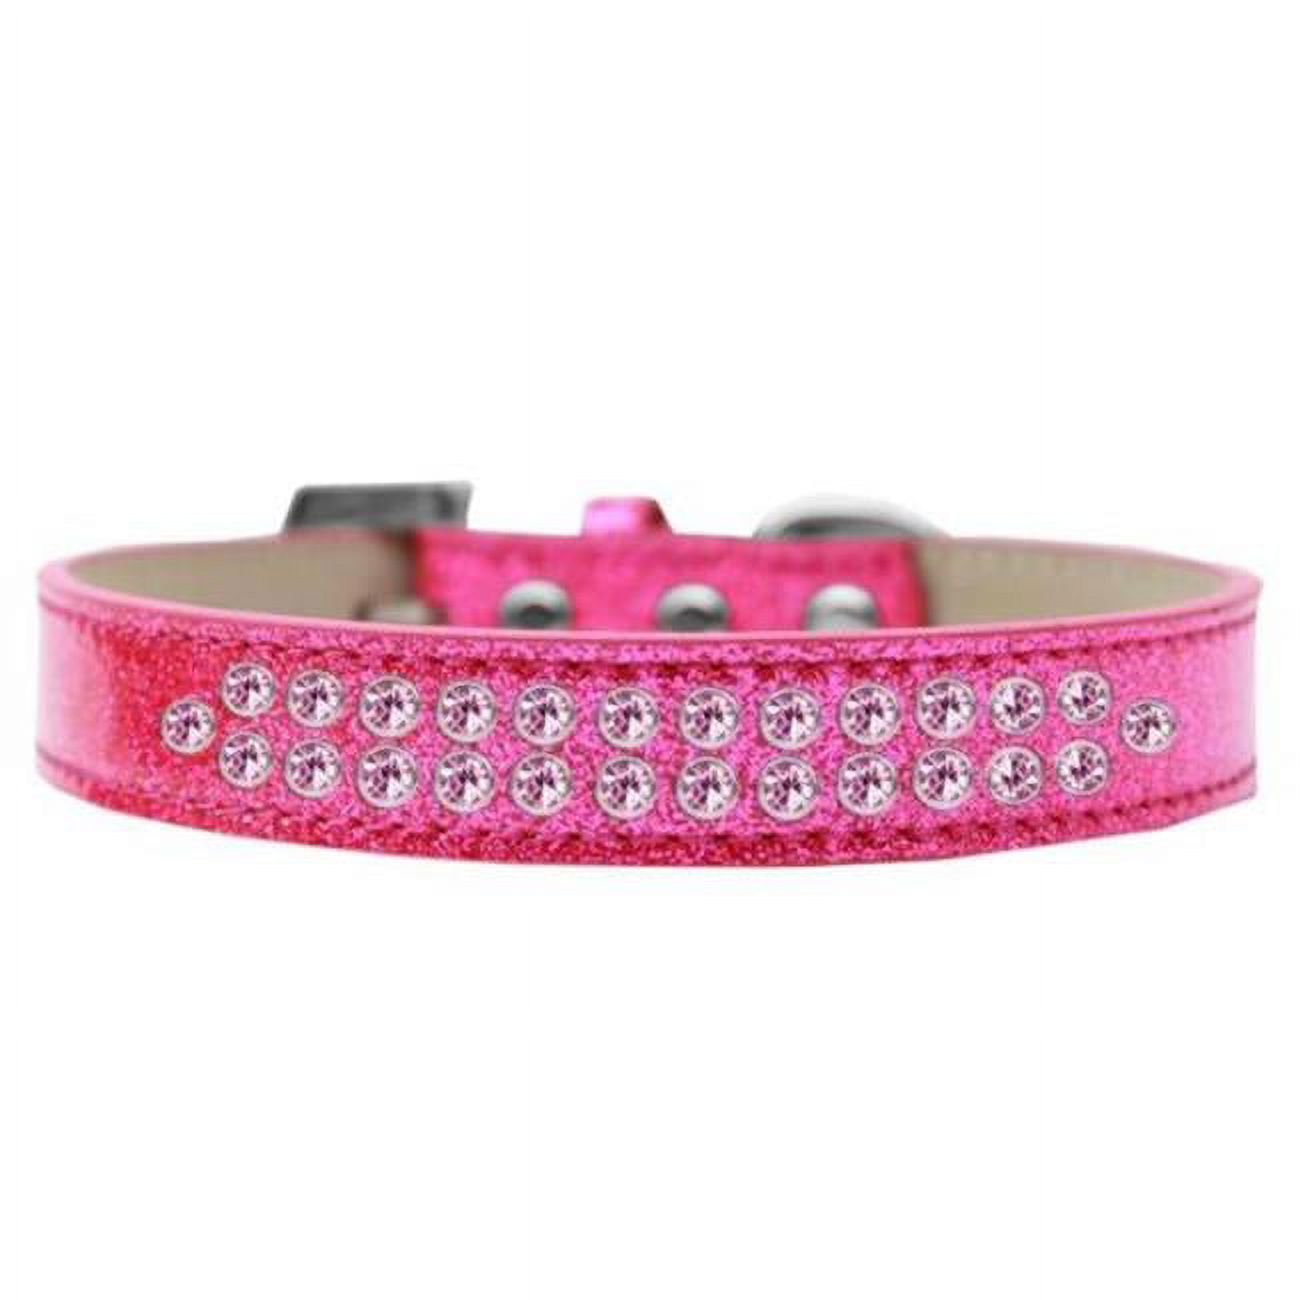 Mirage Pet Products614-06 PK-12 Two Row Light Pink Crystal Dog Collar, Pink Ice Cream - Size 12 - image 1 of 5